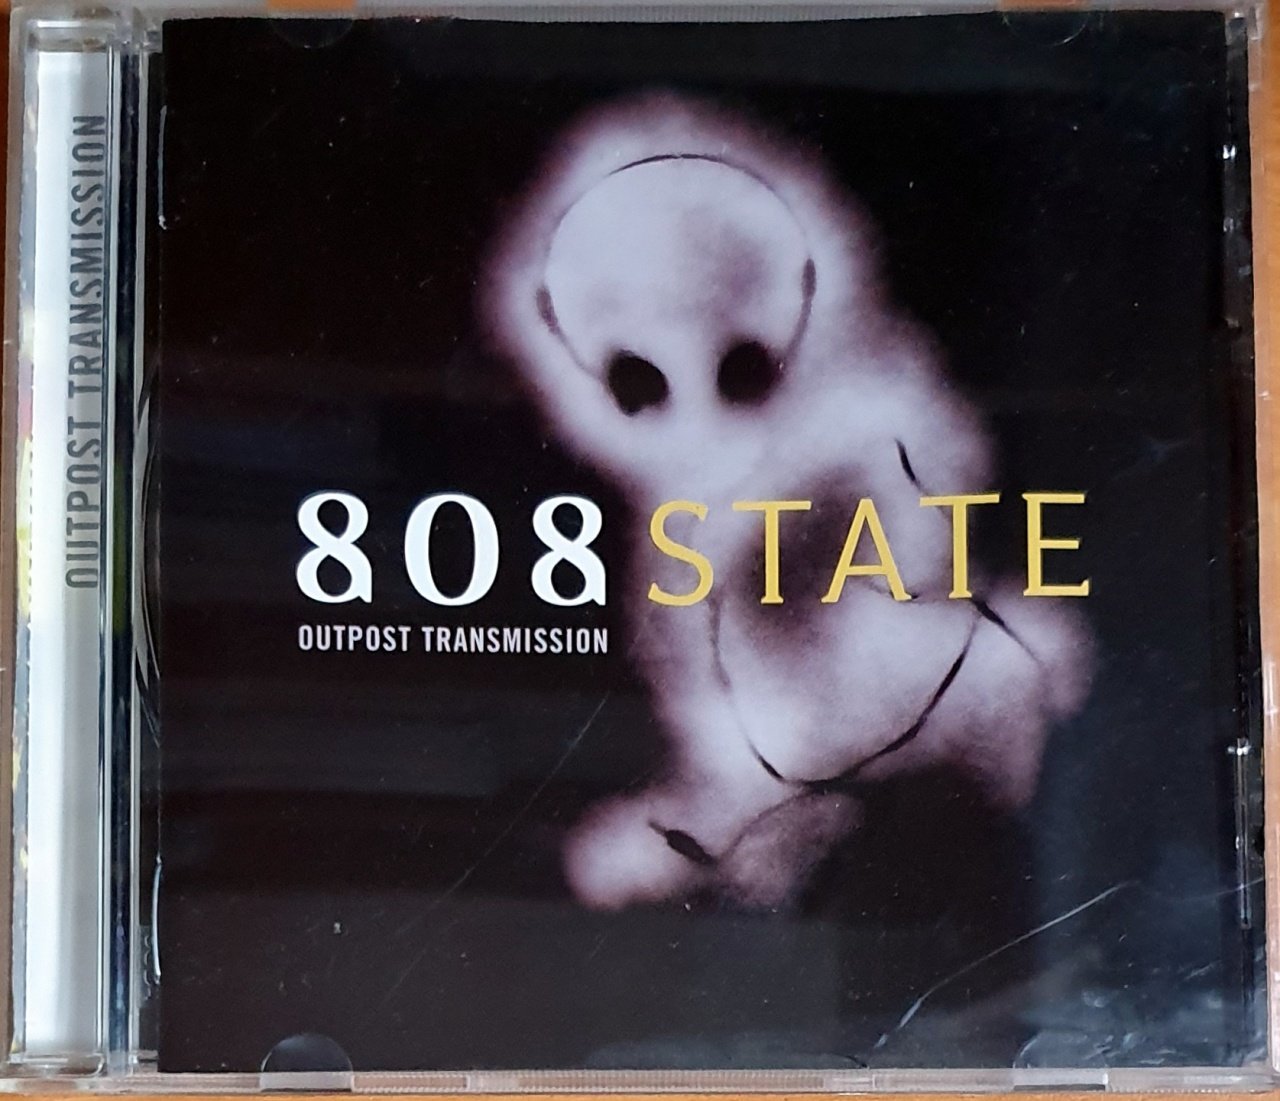 808 STATE - OUTPOST TRANSMISSION (2003) - CD SHADOW RECORDS 2.EL